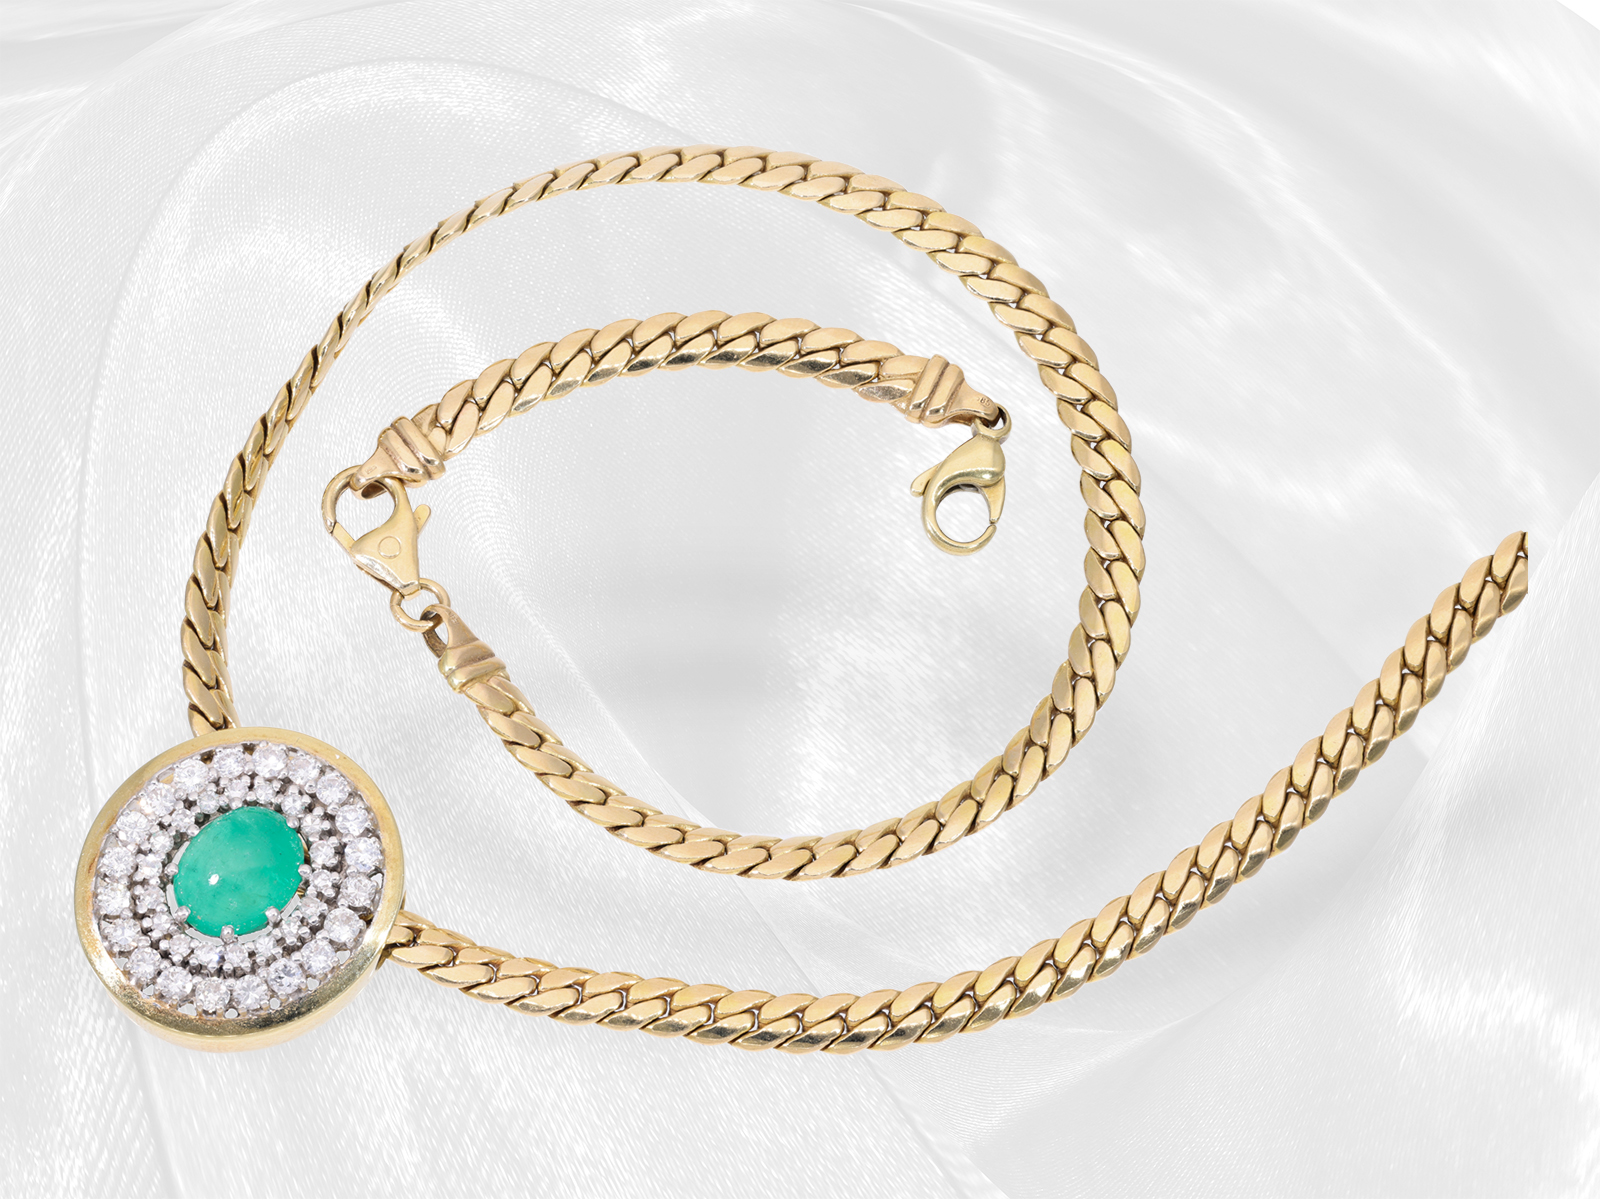 High-quality gold necklace with large emerald/brilliant-cut diamond gold pendant, approx. 6.14ct - Image 2 of 5